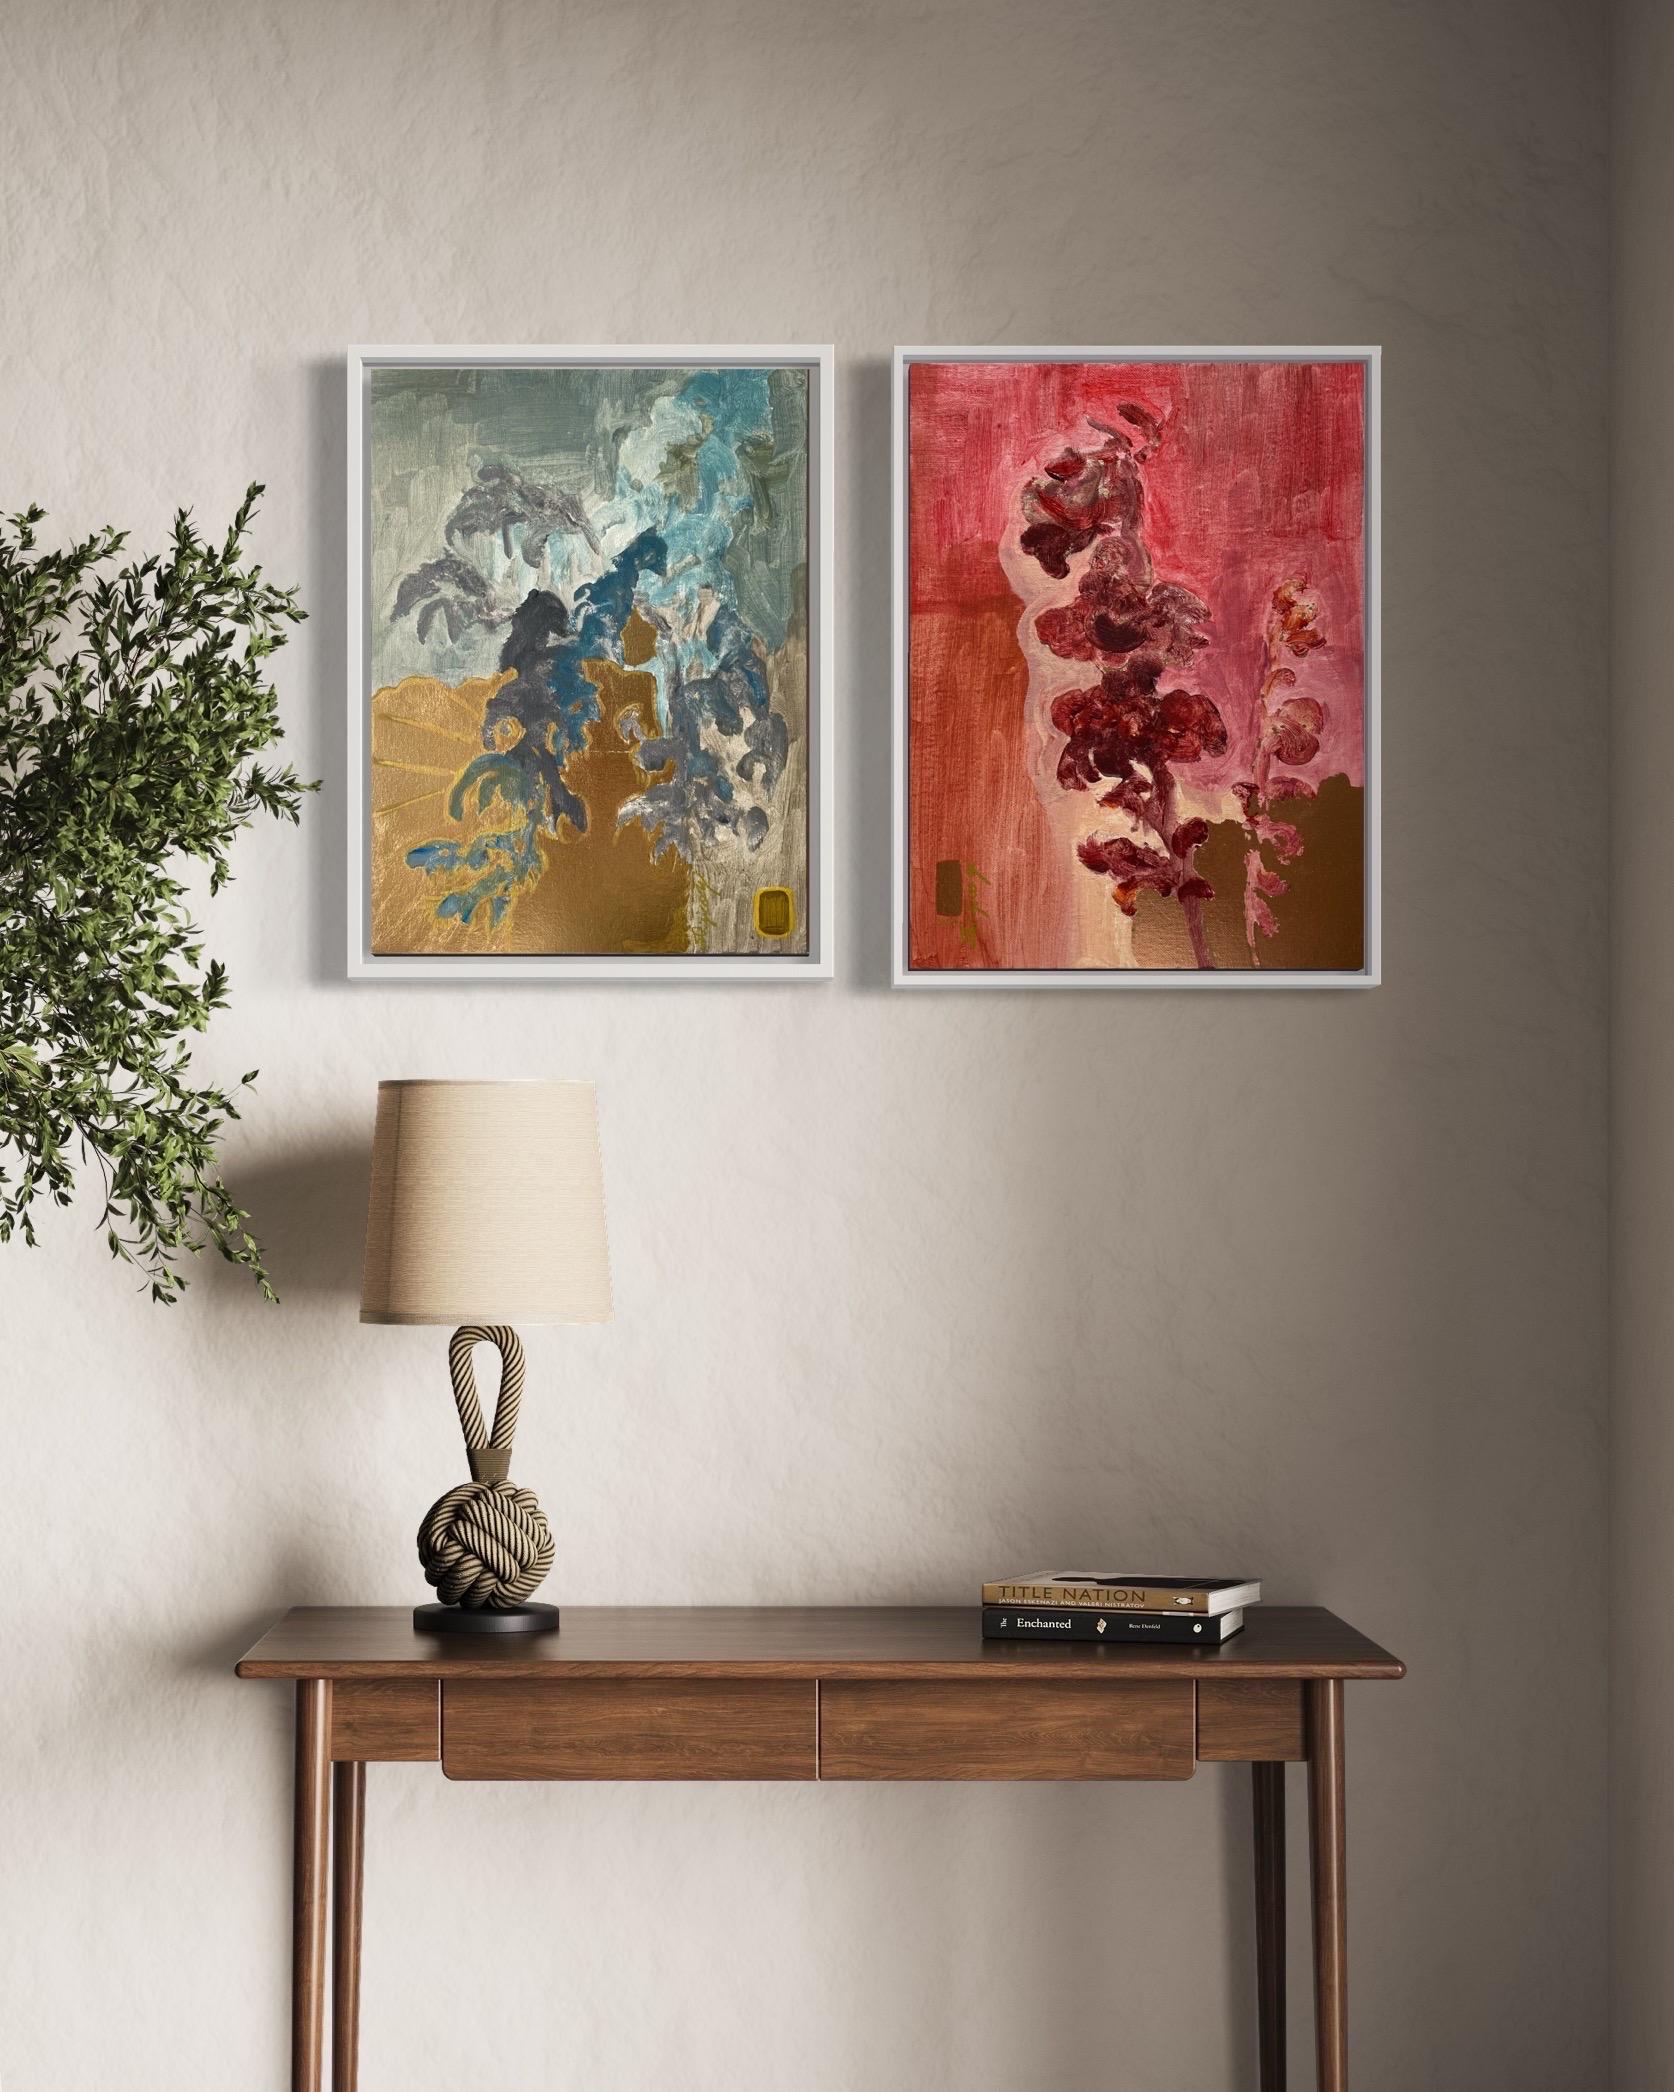 Special Set Offer! This is a stunning set of works by Shizico Yi on Canvas Boards includes:
Sunlit-Primary Colour Series- Blue
Sunlit-Primary Colour Series- Red

1- Primary Colour Series- Blue is Shizico Yi's latest project, inspired by Japanese